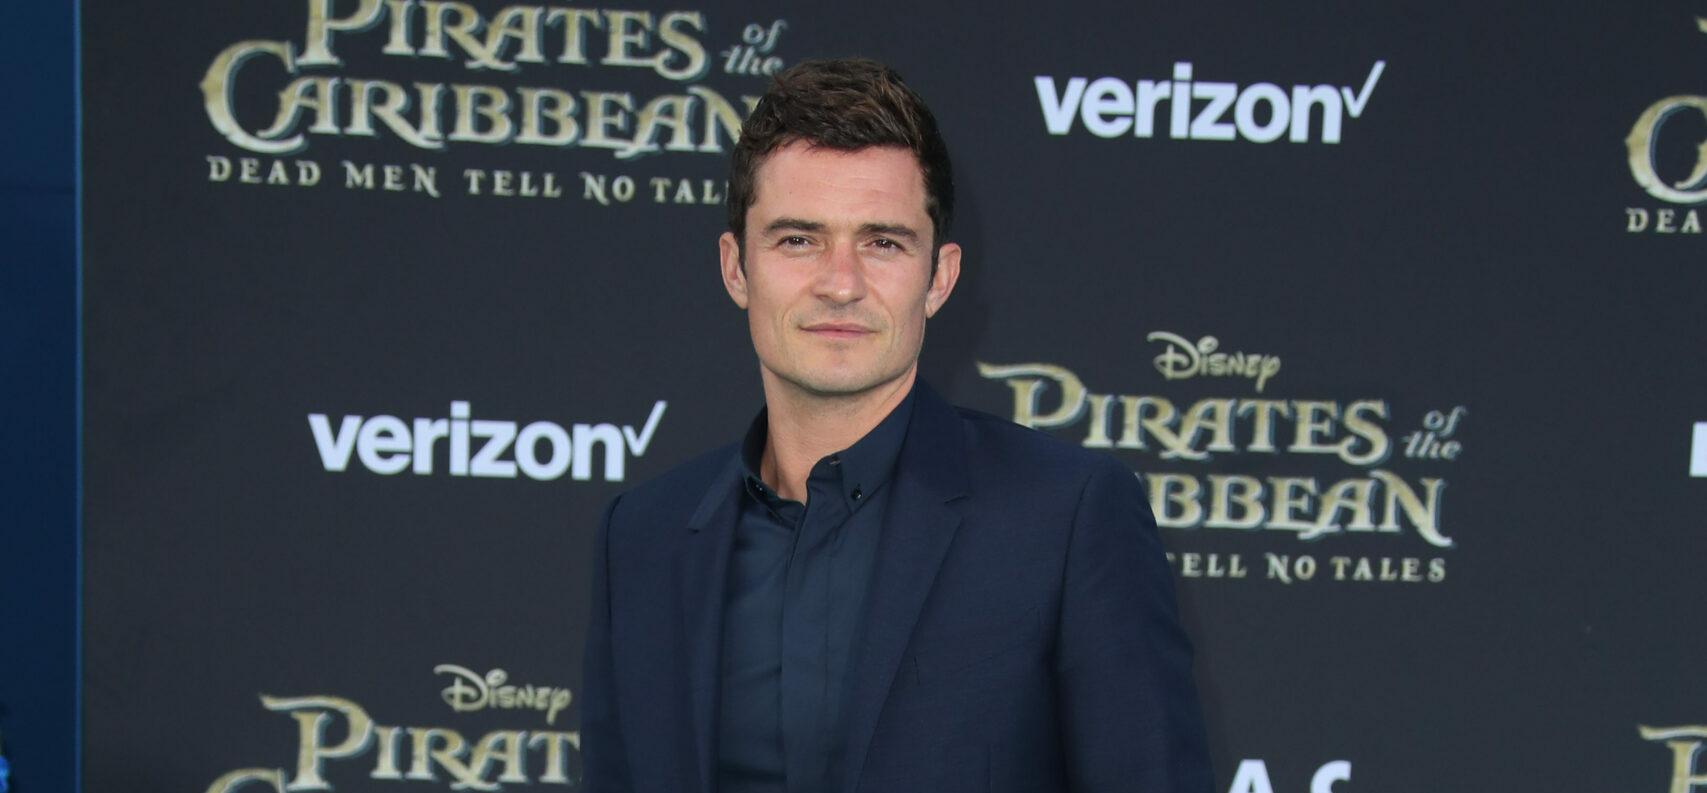 Orlando Bloom Open To Return As Will Turner In ‘Pirates’ Films